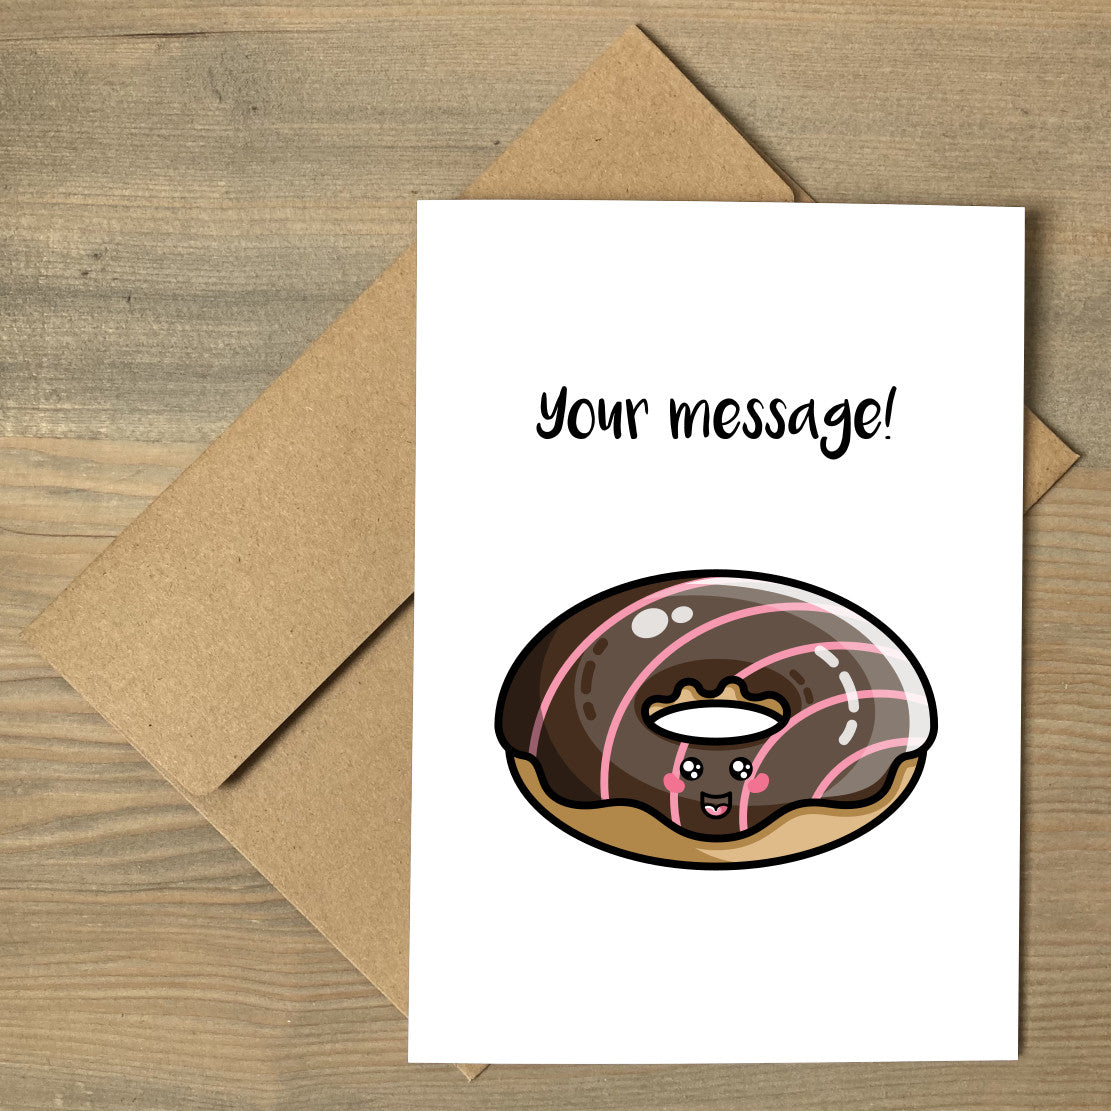 A white greeting card lying flat on a brown envelope, with a design of a kawaii cute chocolate iced doughnut with your own personalised message above.